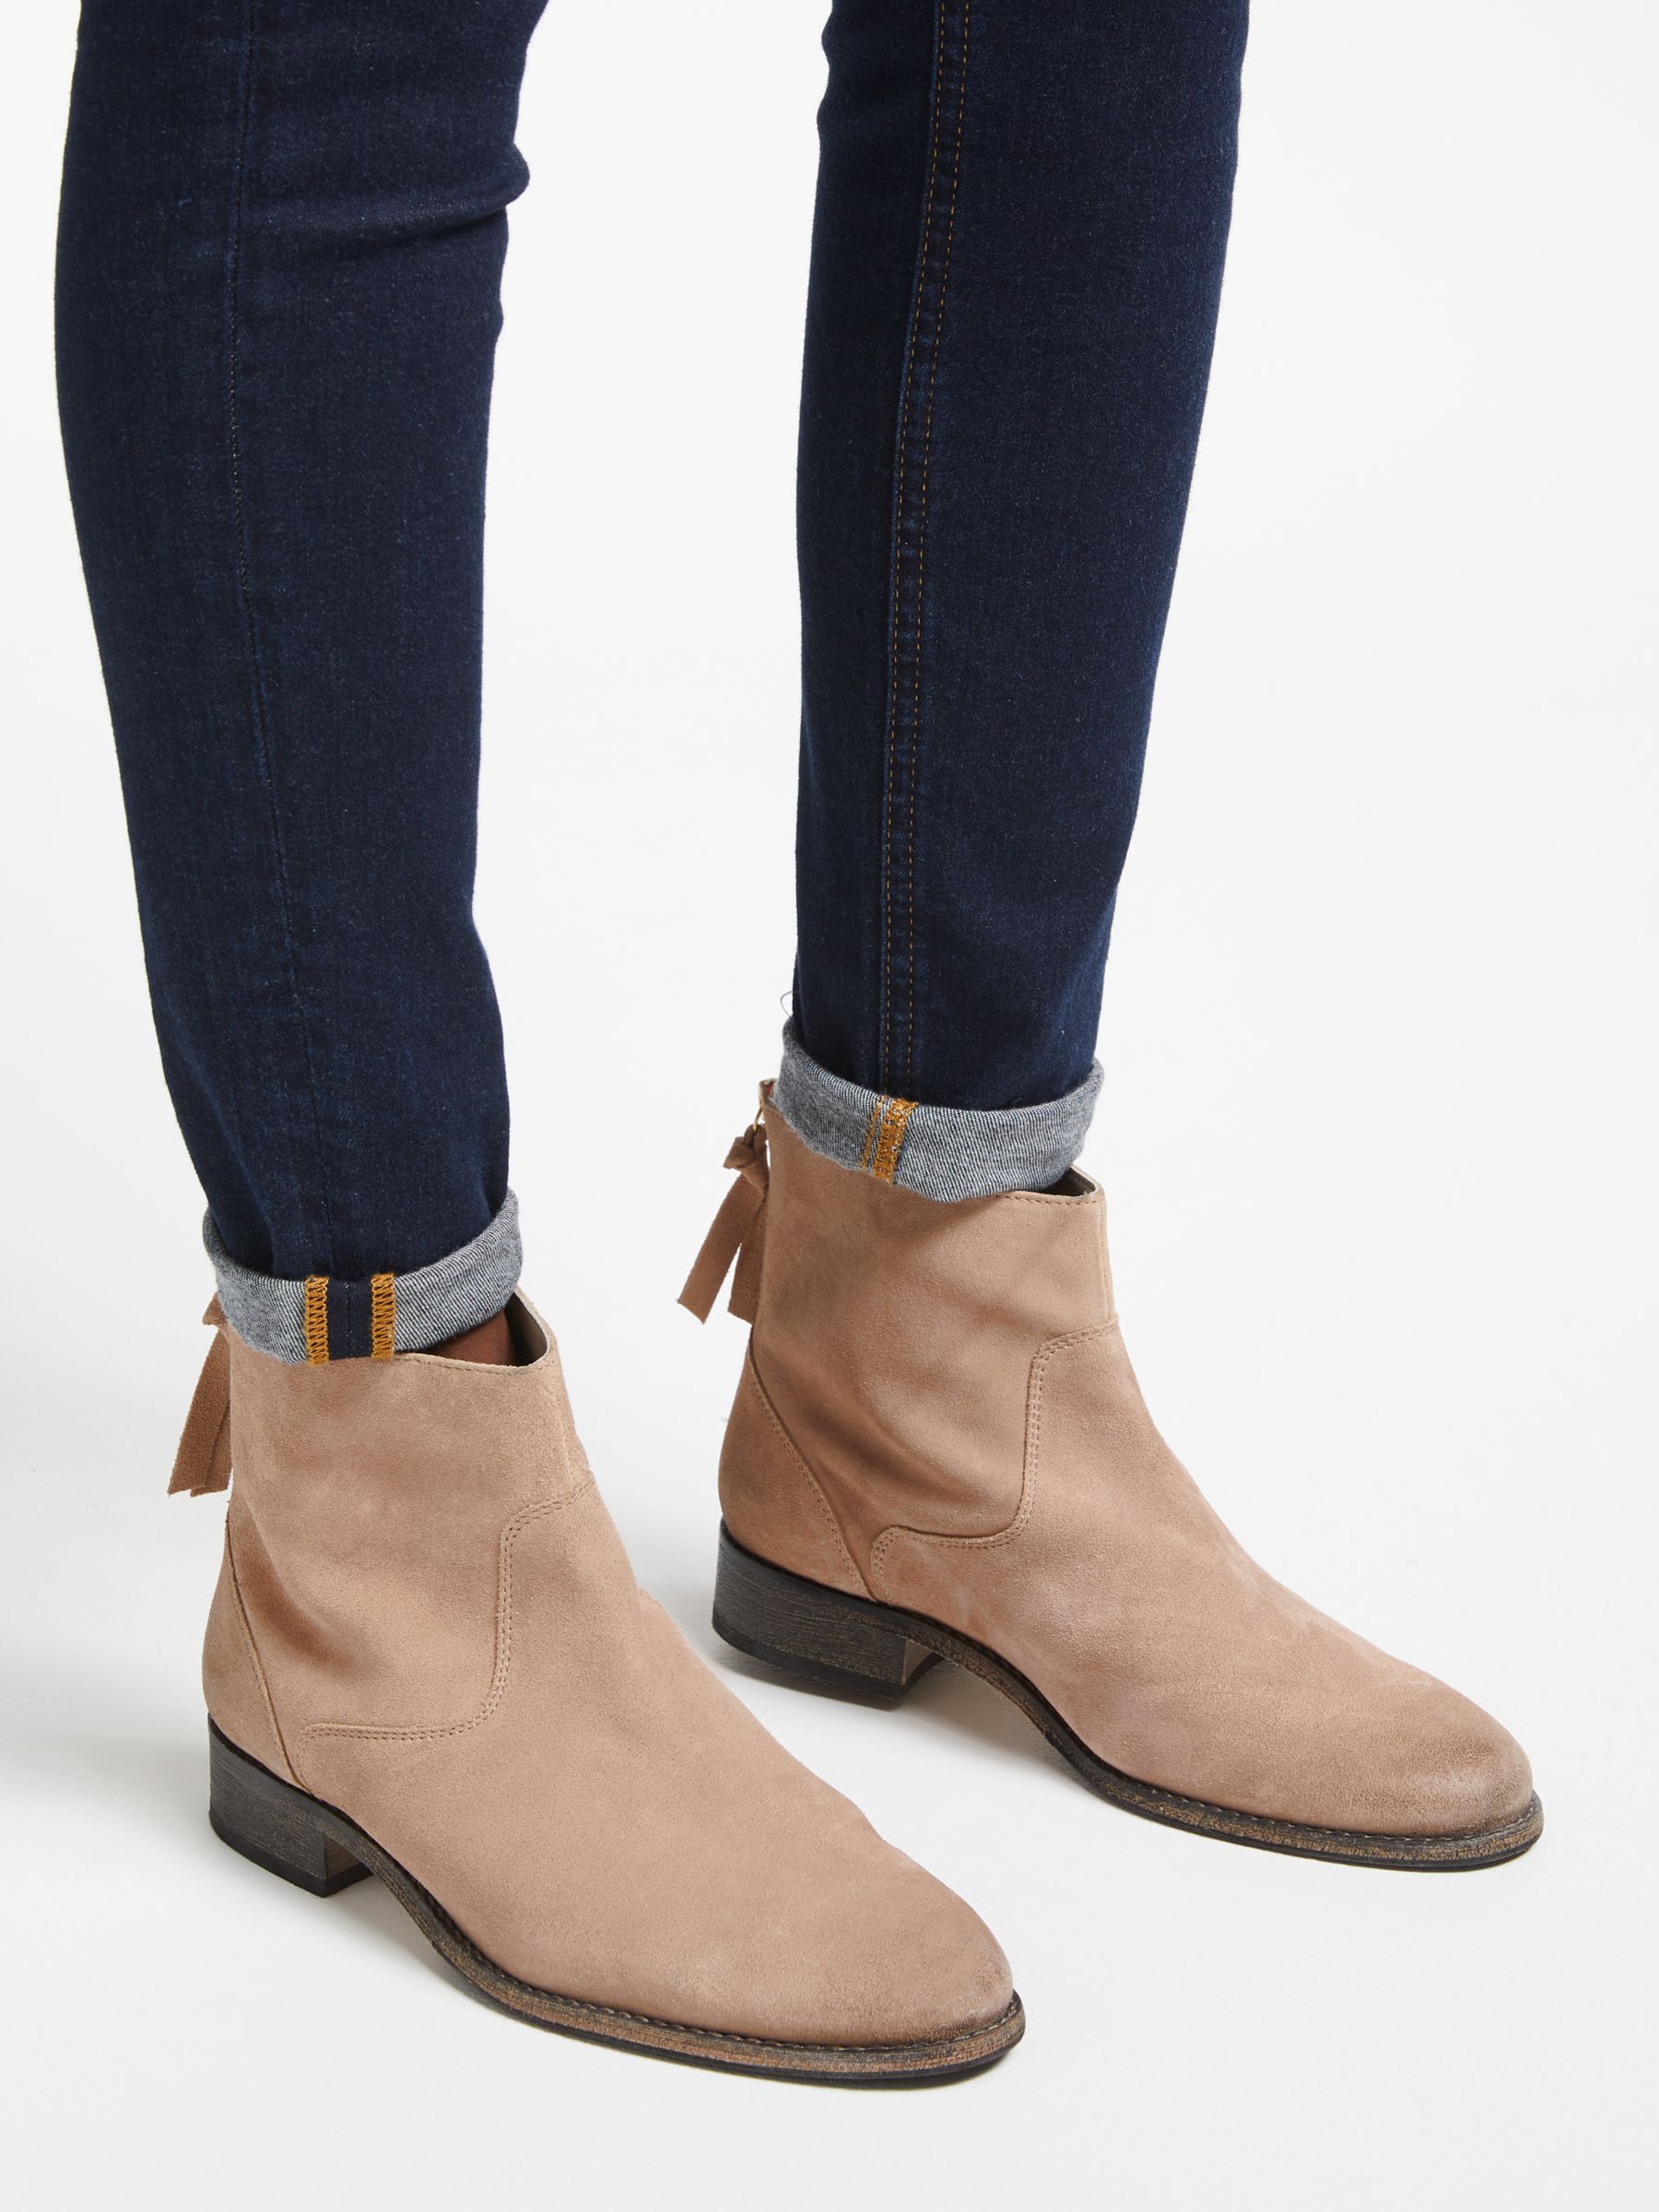 Boden Kingham Ankle Boots, Soft Truffle 